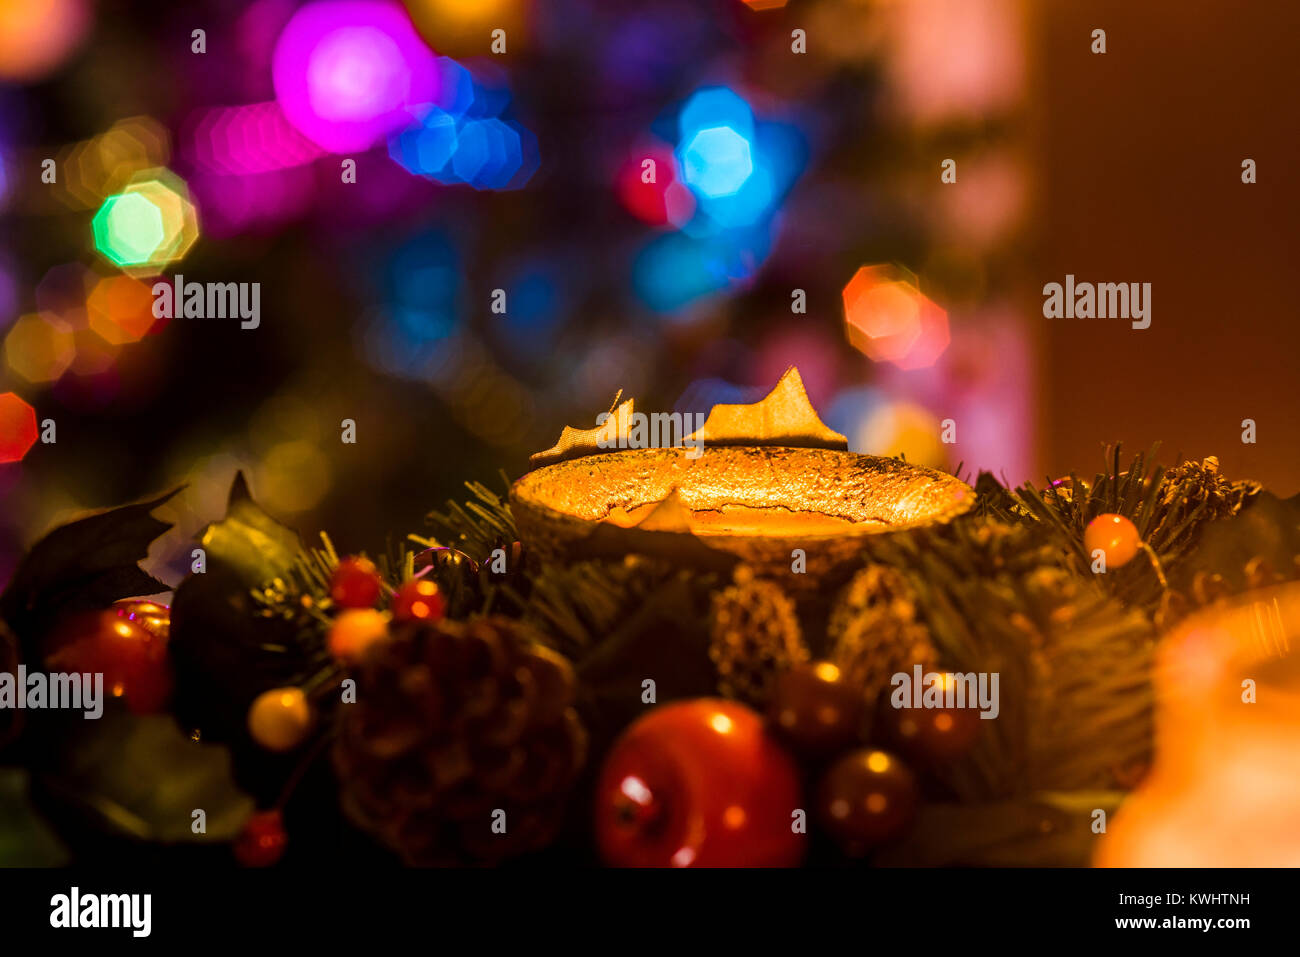 Christmas garland with candle and tree lights in background, festive warm ambience. Stock Photo